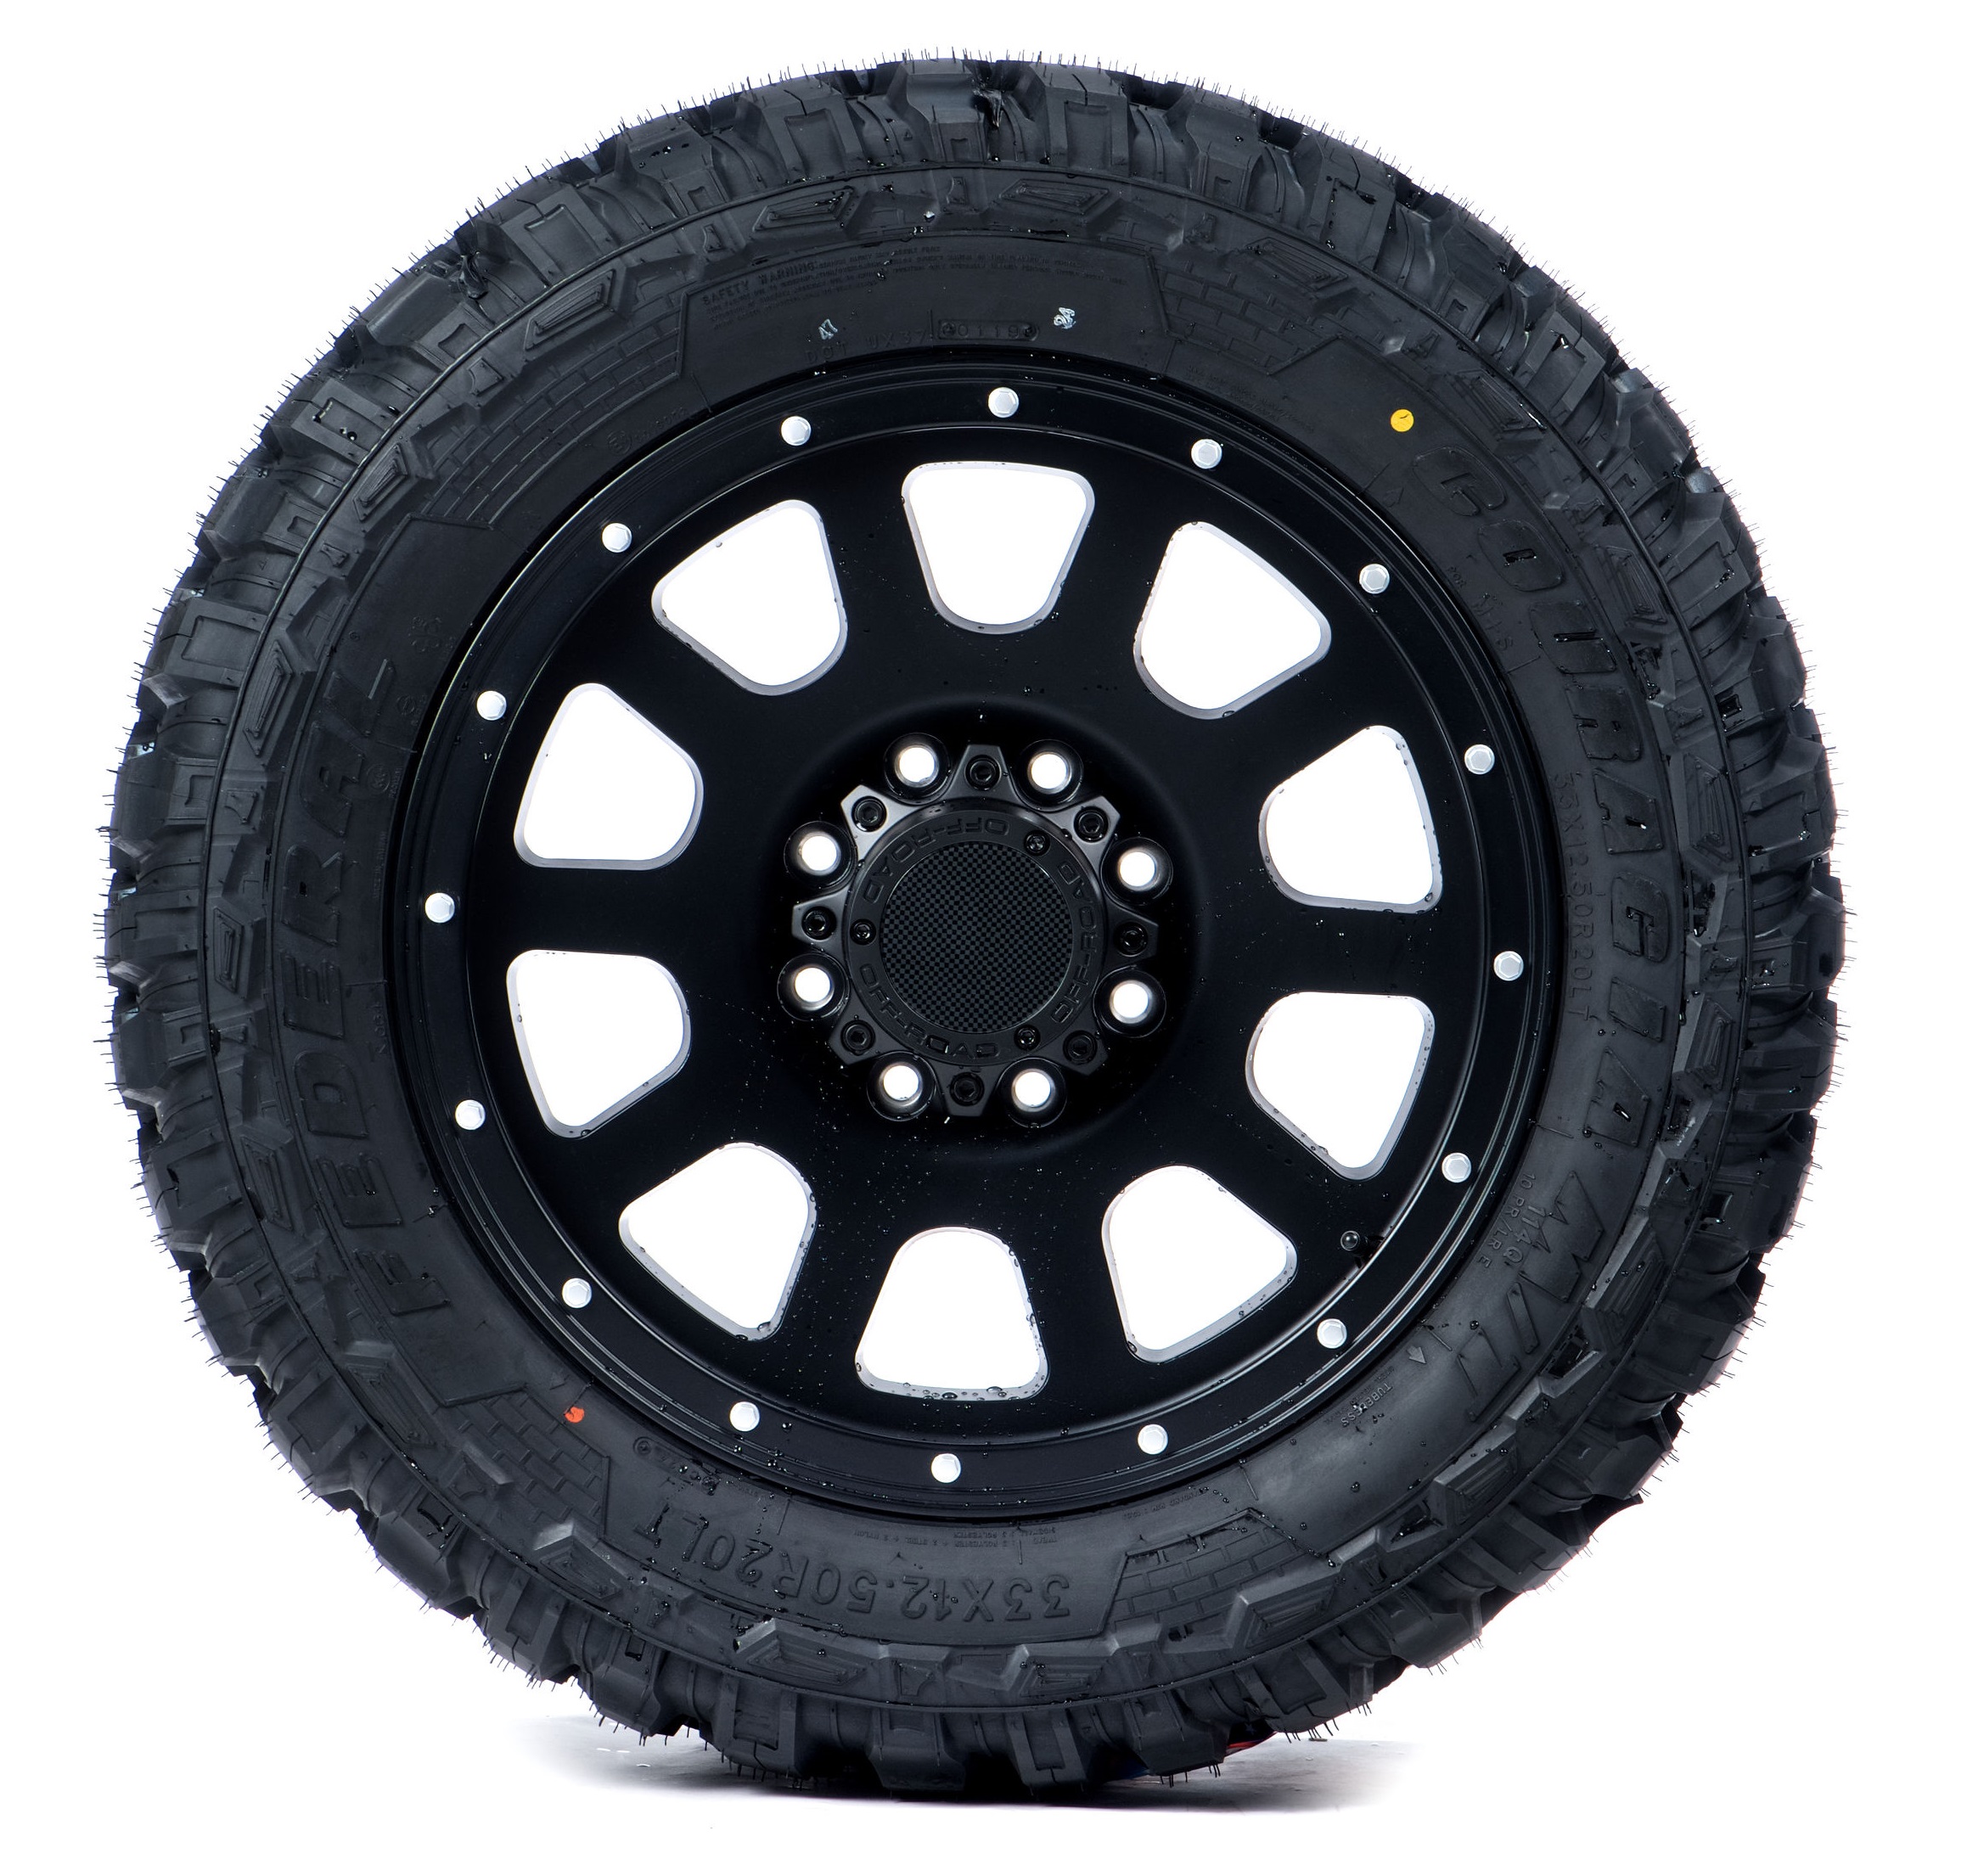 Federal Couragia M/T Mud-Terrain Tire - 33X12.50R20 LRE 10PLY - image 2 of 5